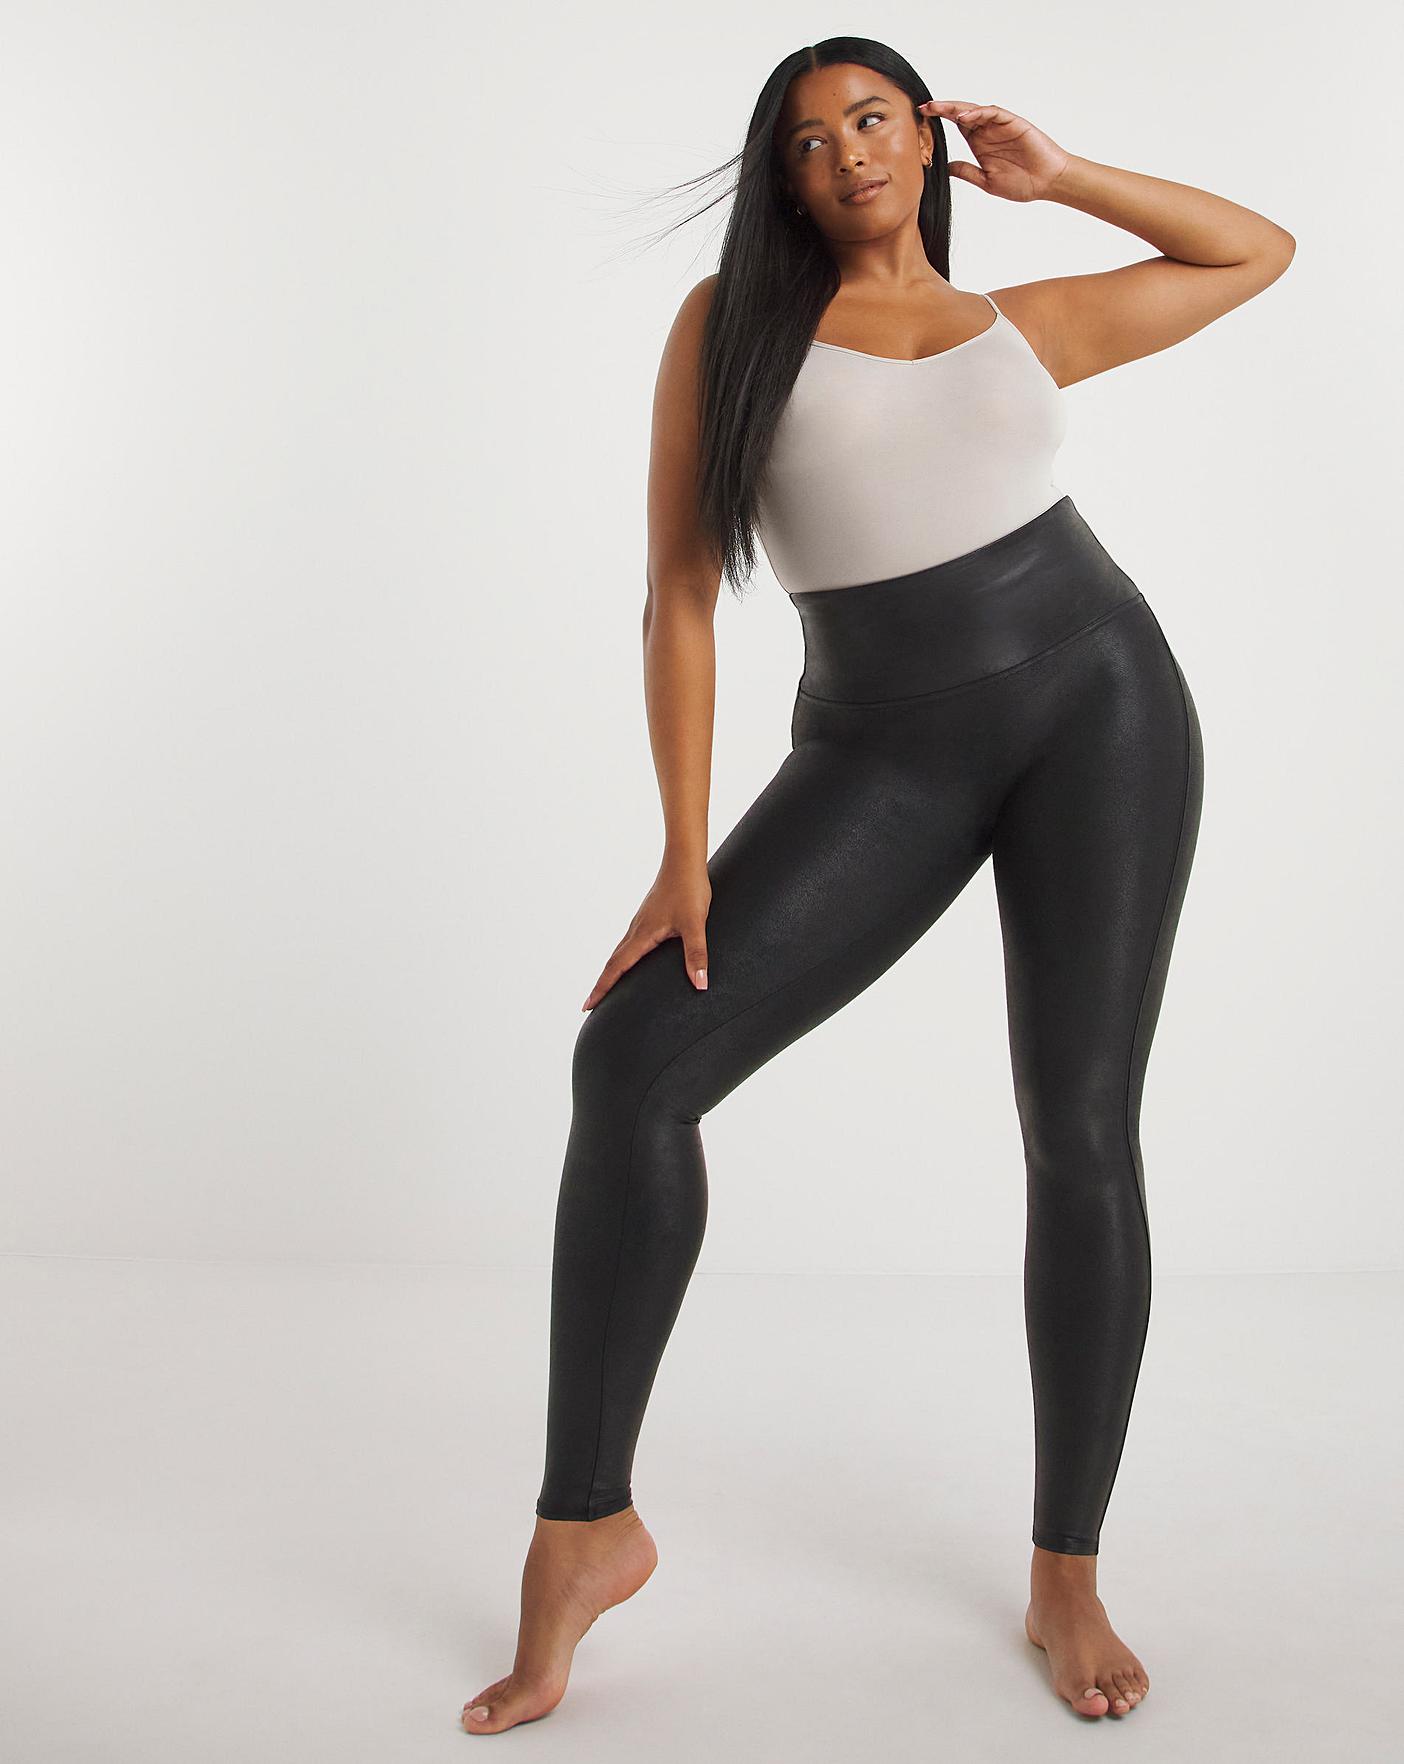 SPANX - NEW! NEW! NEW! We made your favorite faux leather leggings